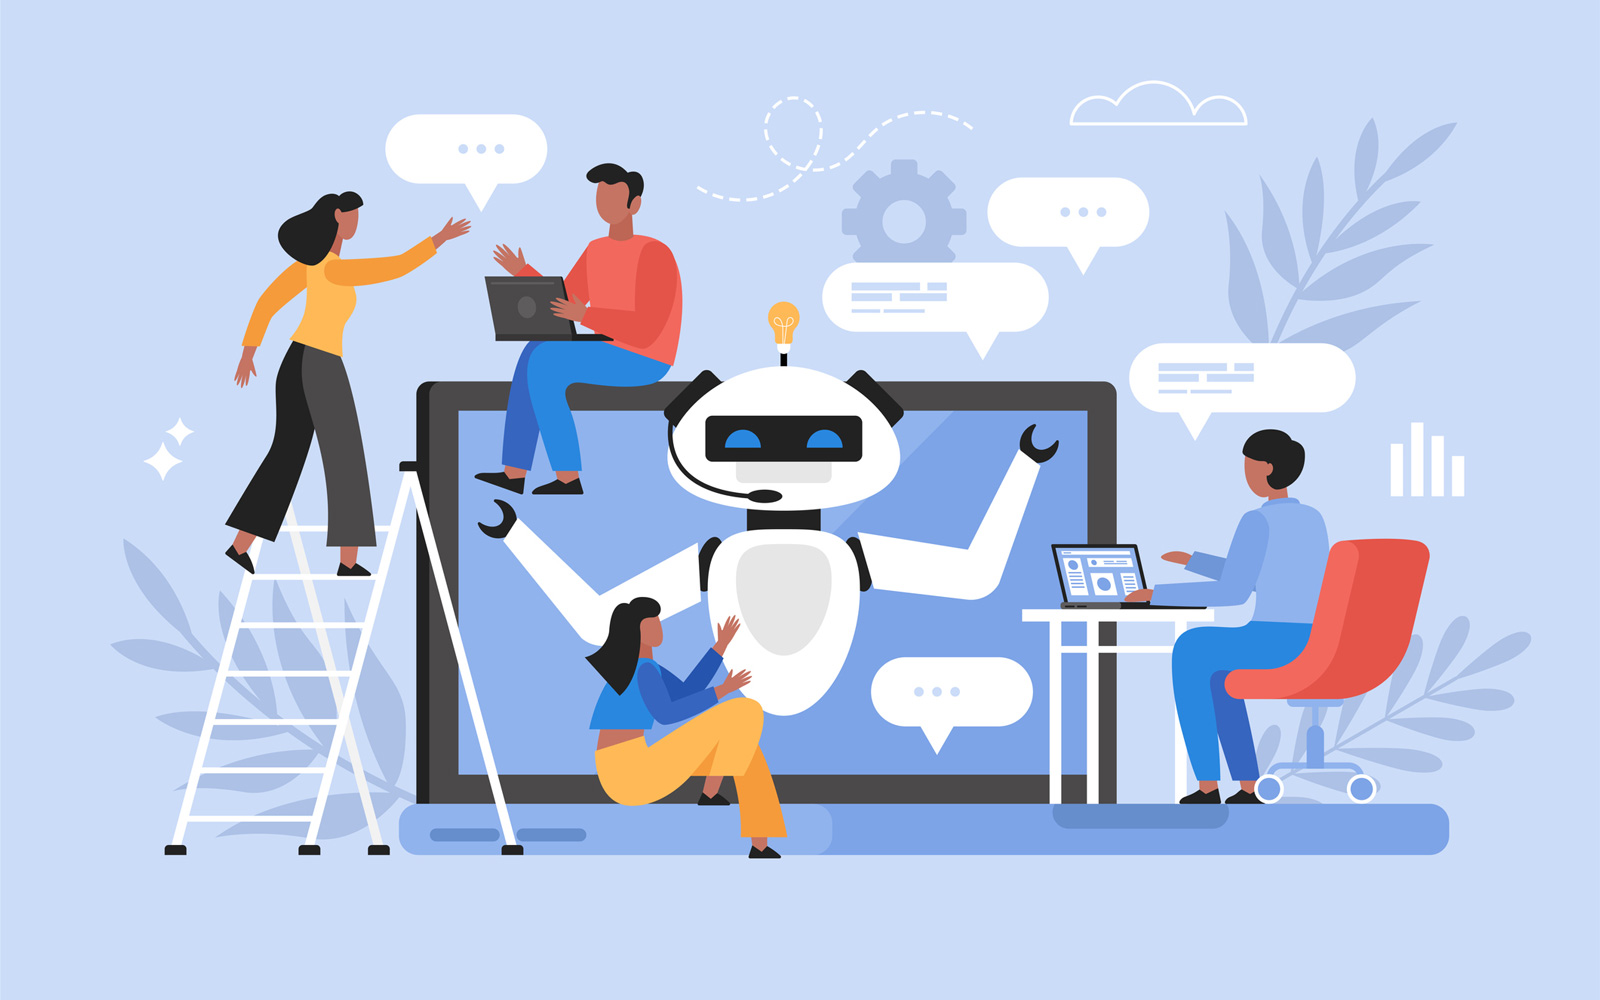 AI as a Tool for Marketers